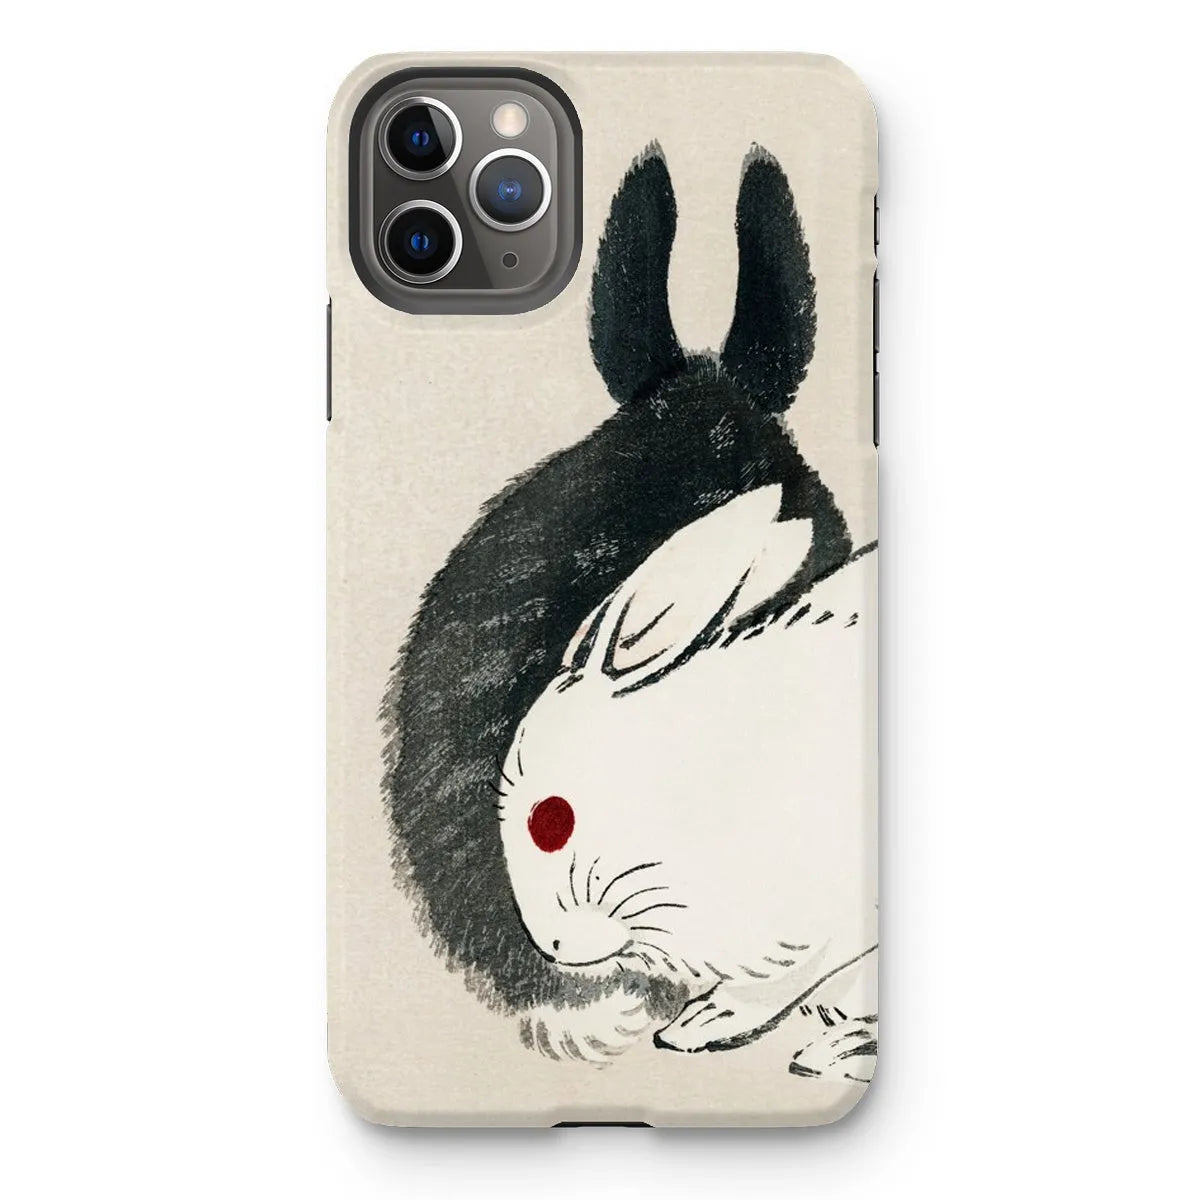 Rabbits - Black And White Meiji Art Phone Case - Kōno Bairei - Iphone 11 Pro Max / Matte - Mobile Phone Cases